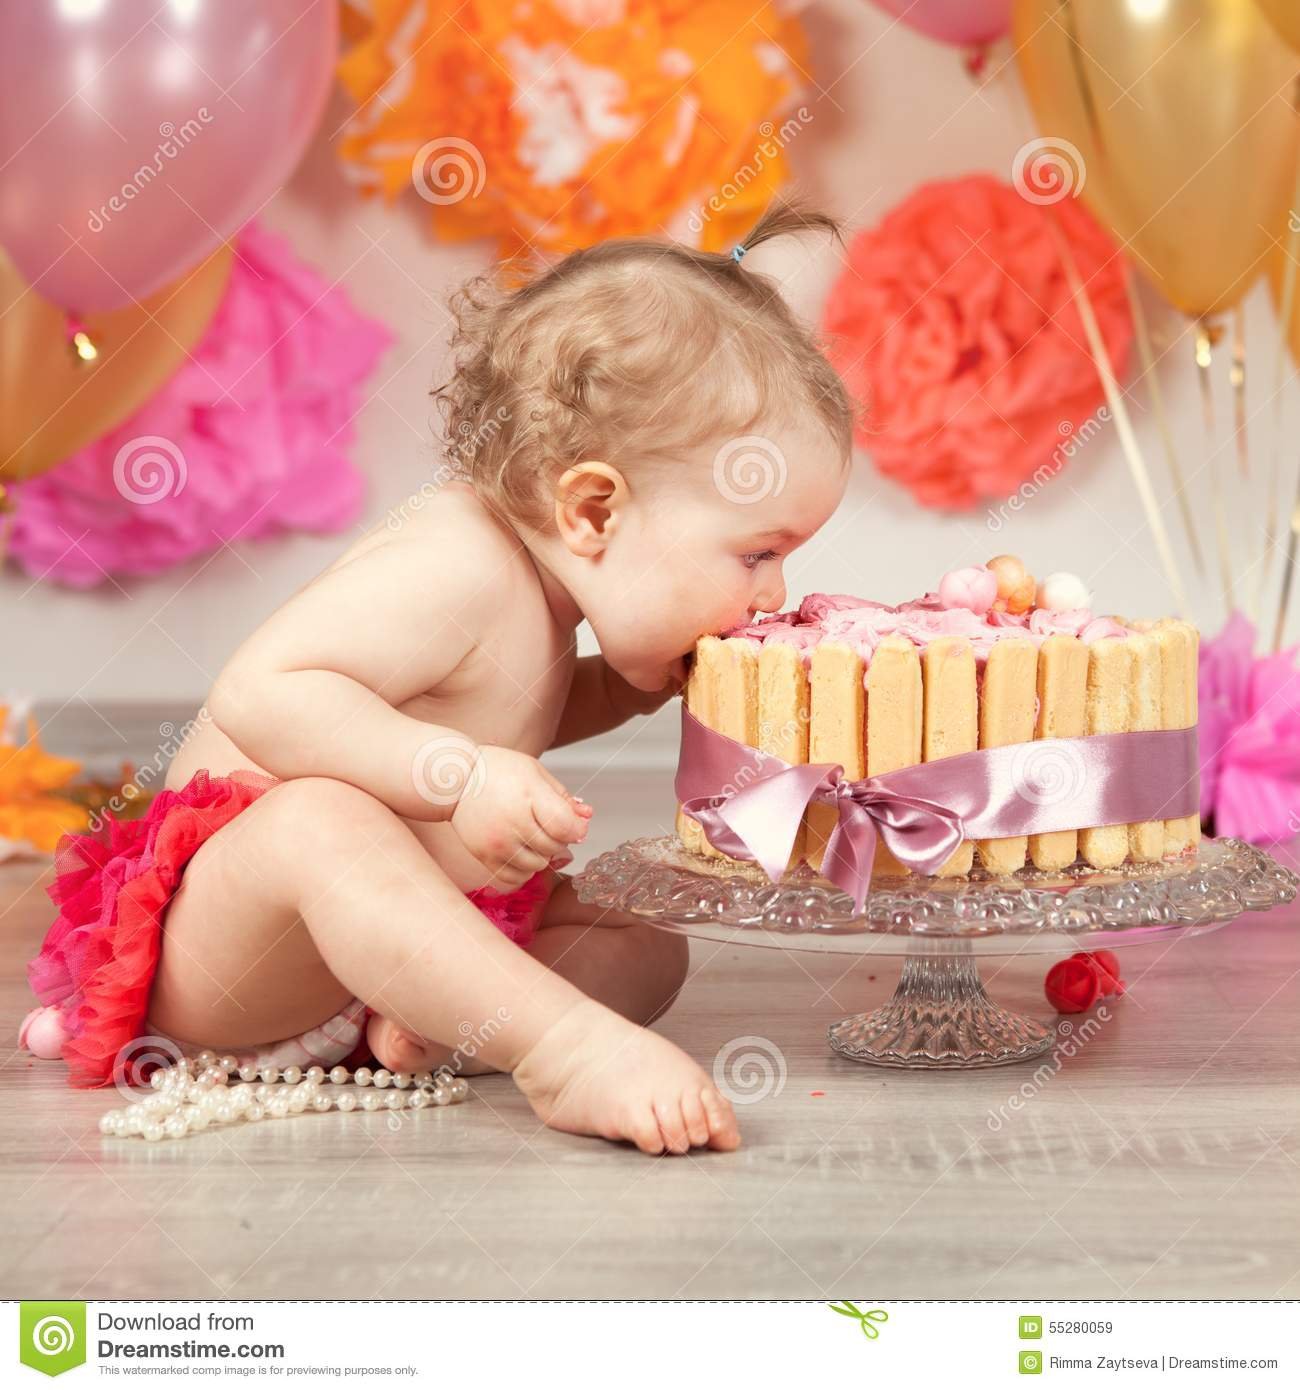 Happy Birthday Images For Cute Baby Girl